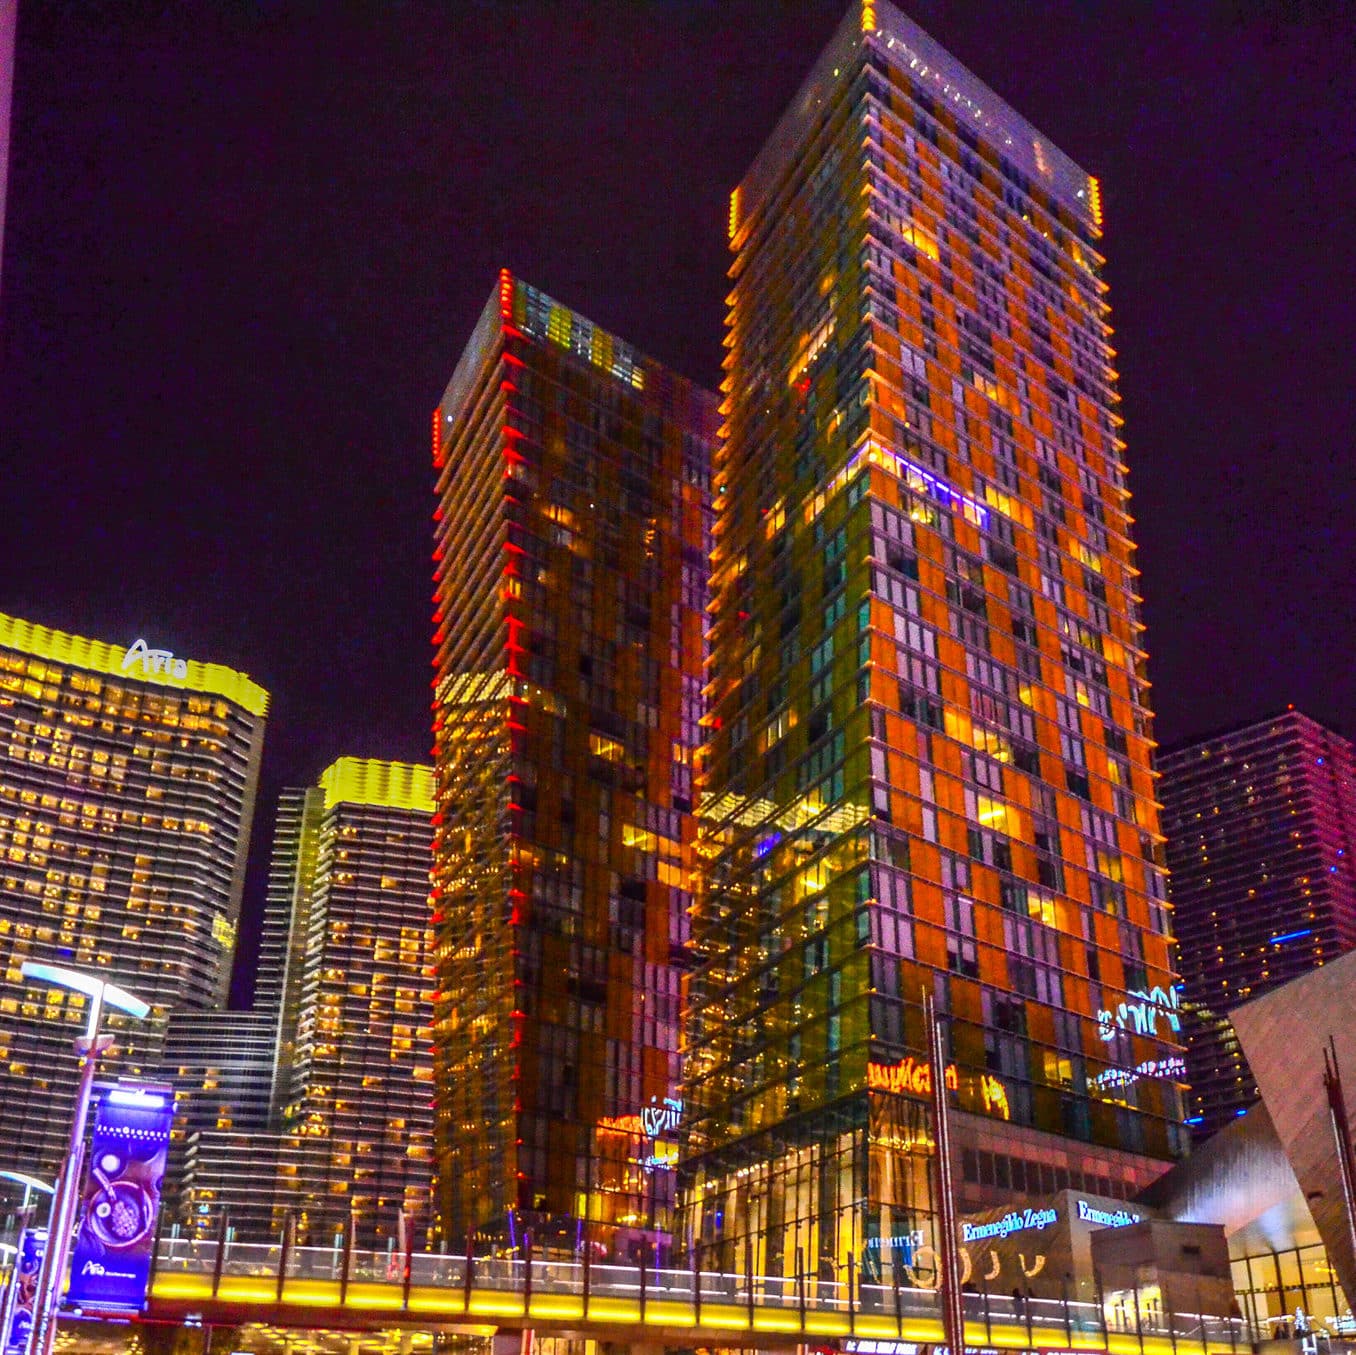 Veer towers at night